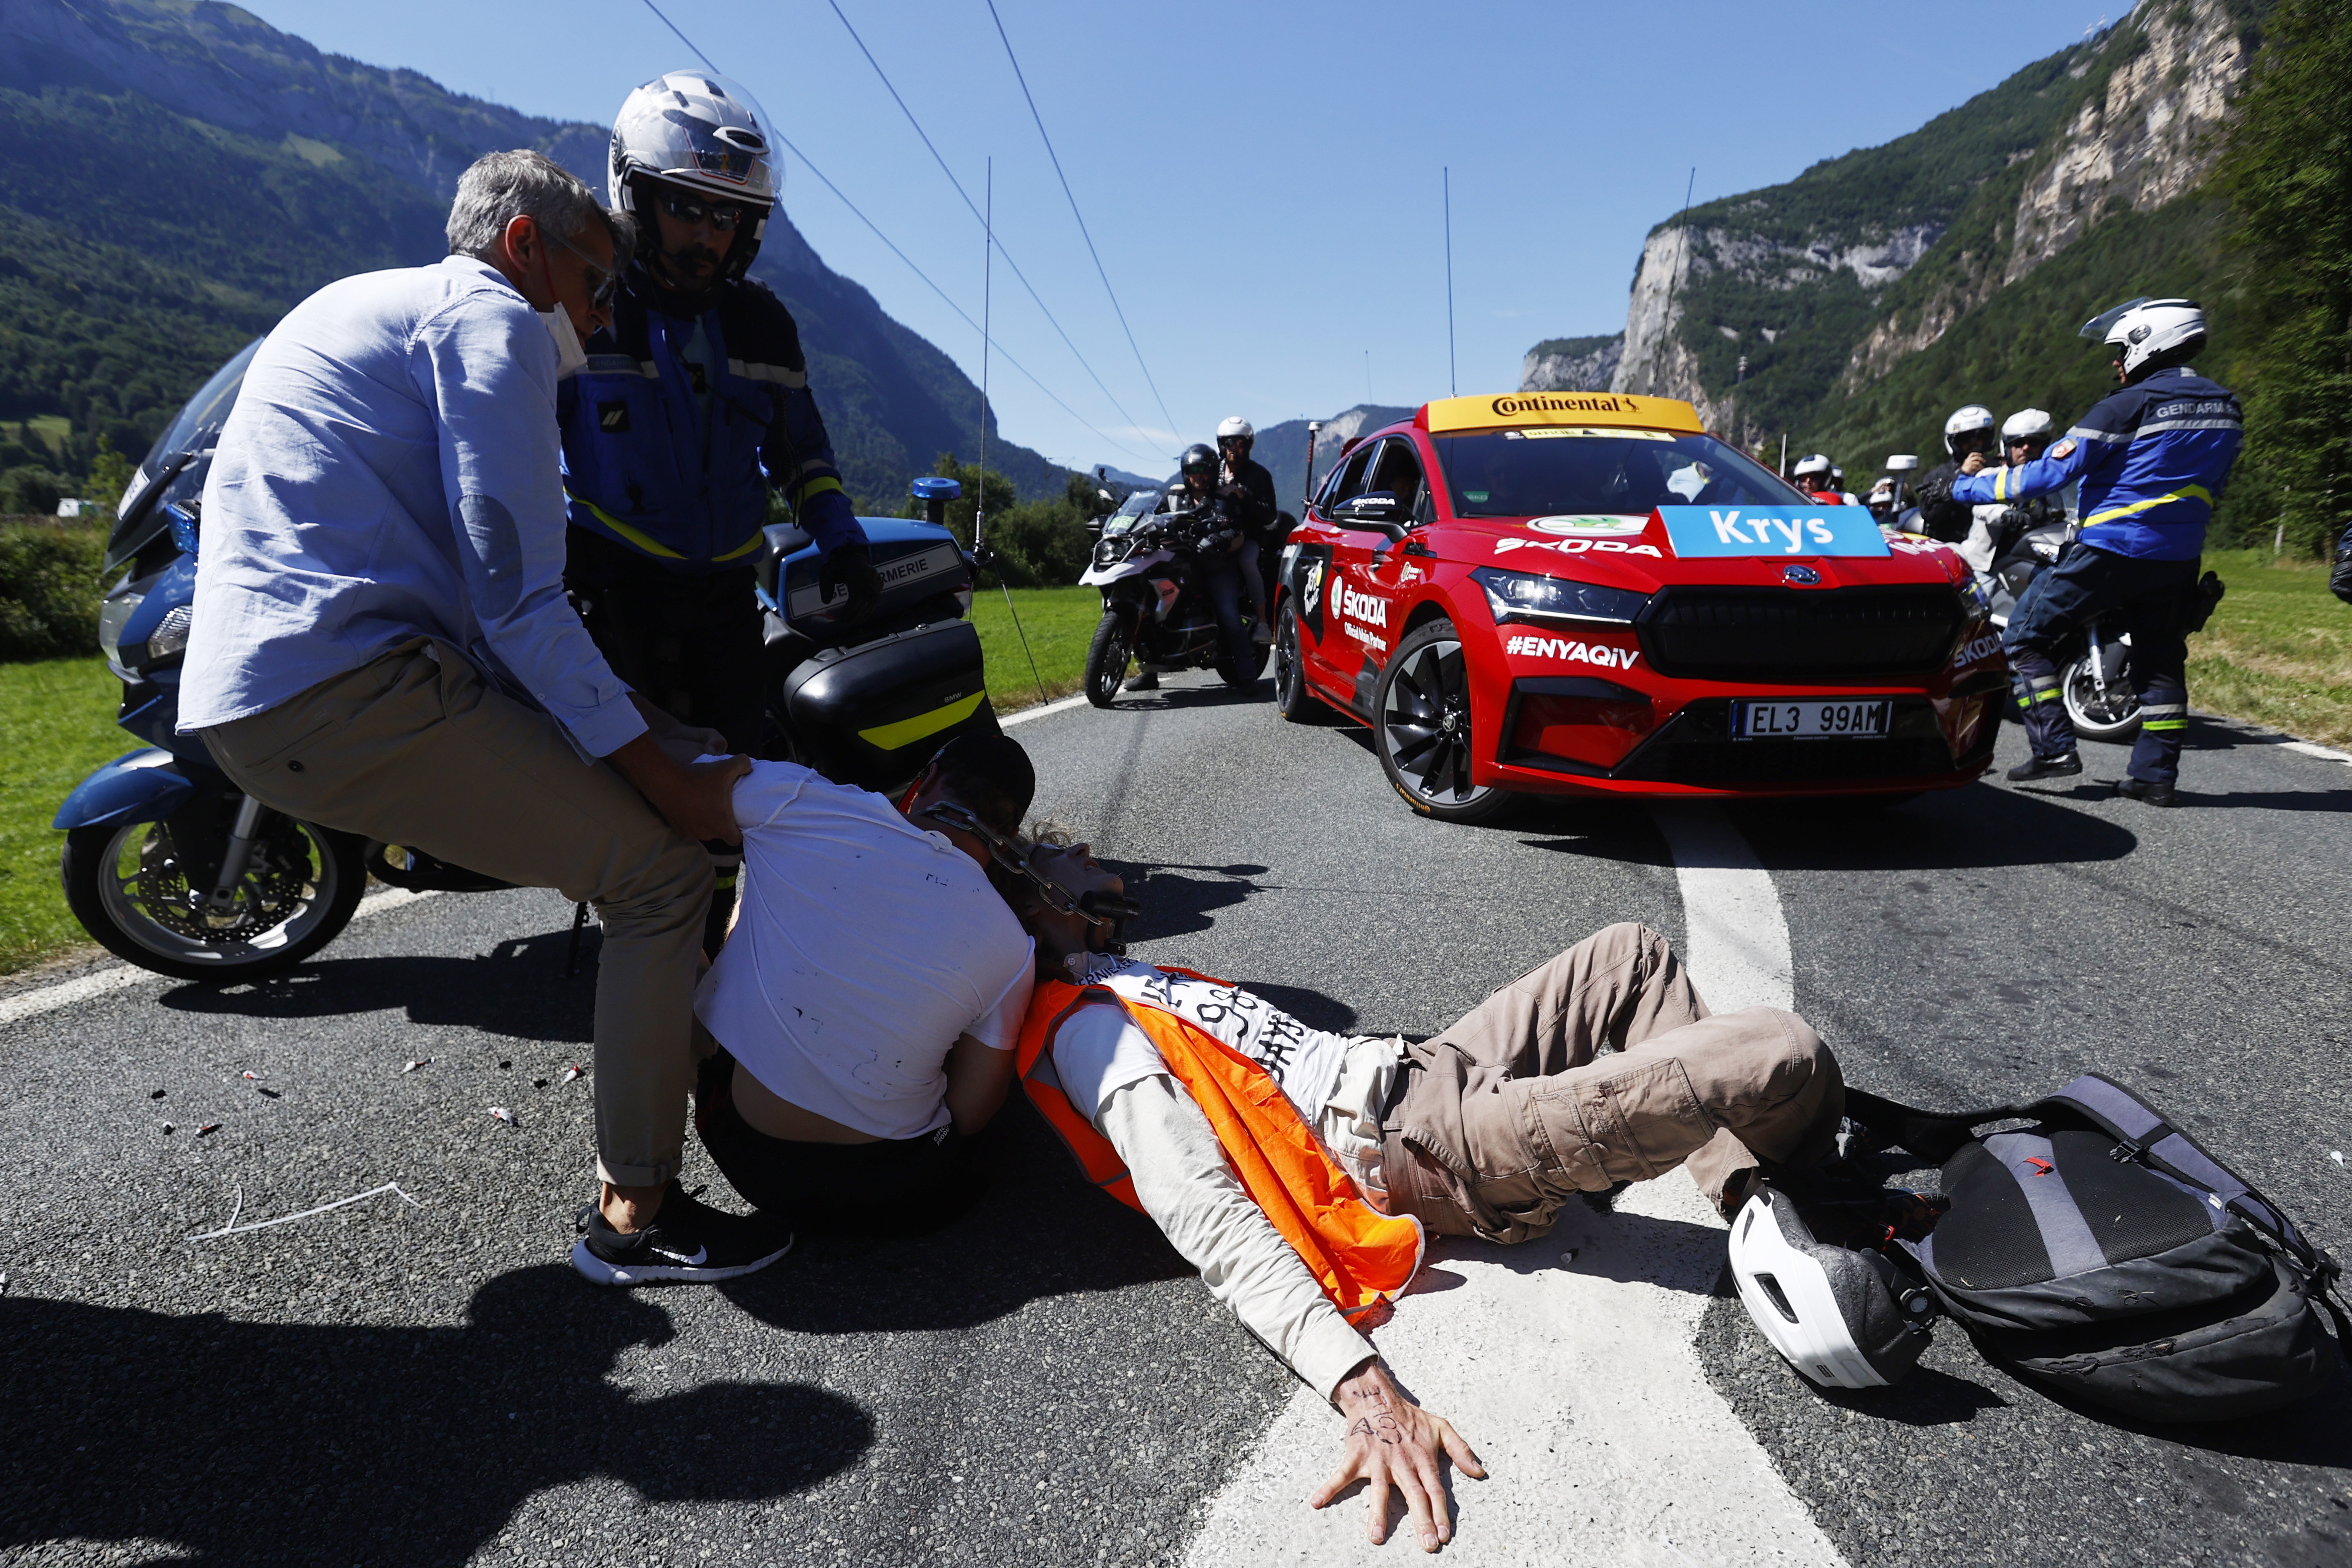 Megeve (France), 12/07/2022.- Police remove protesters from the road during the 10th stage of the Tour de France 2022 over 148,5km from Morzine to Megeve, France, 12 July 2022. (Ciclismo, Protestas, Francia) EFE/EPA/GUILLAUME HORCAJUELO